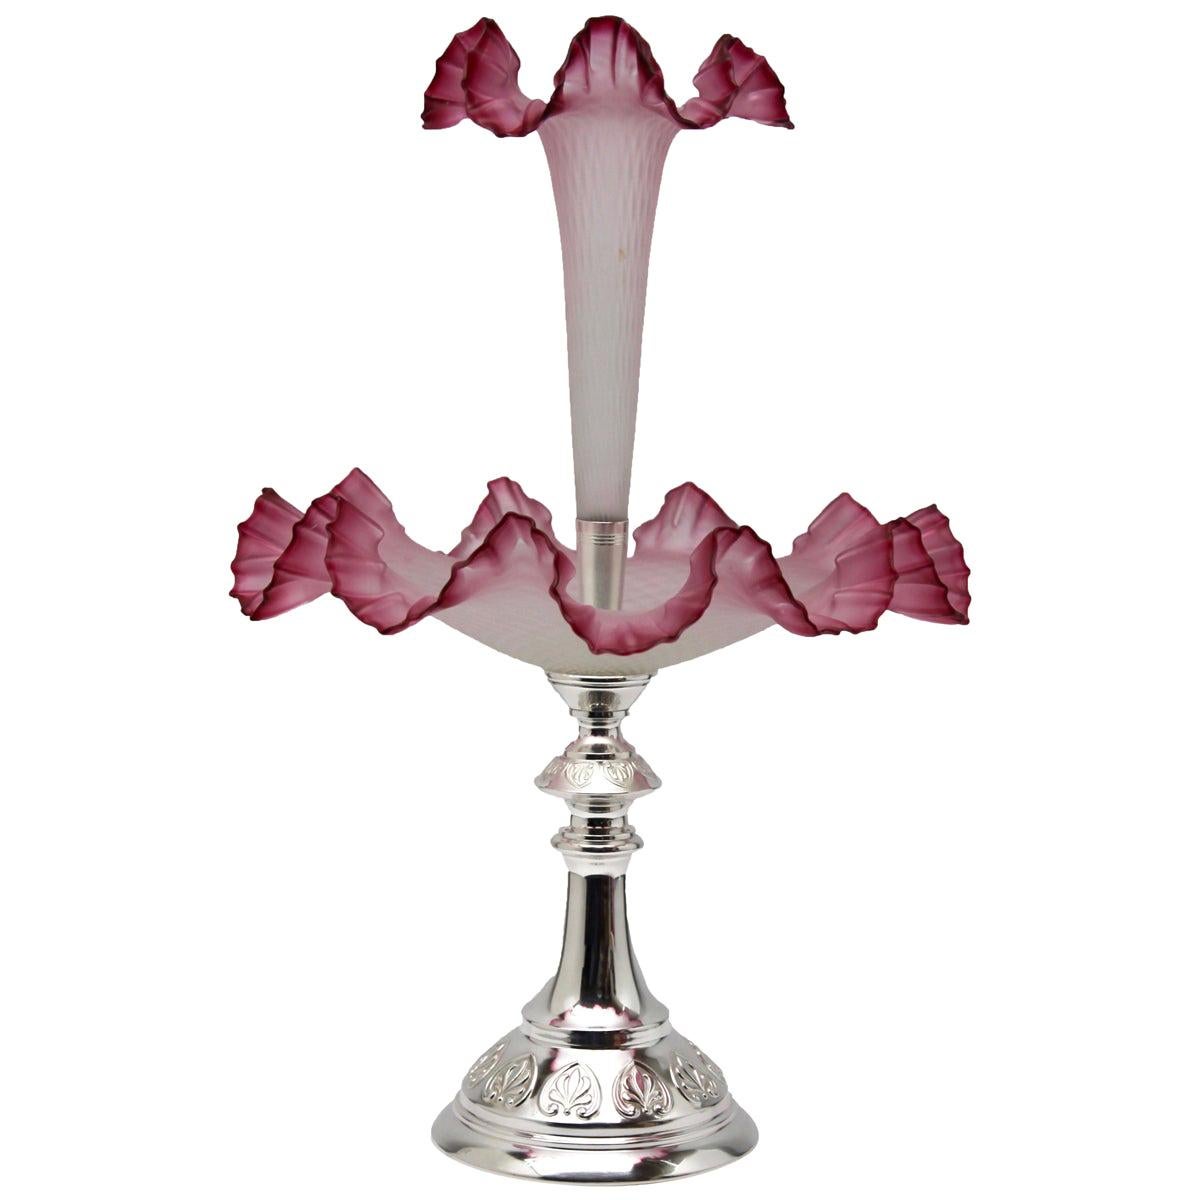 Art Nouveau Centrepiece Attributed to Kayser in Germany, circa 1900